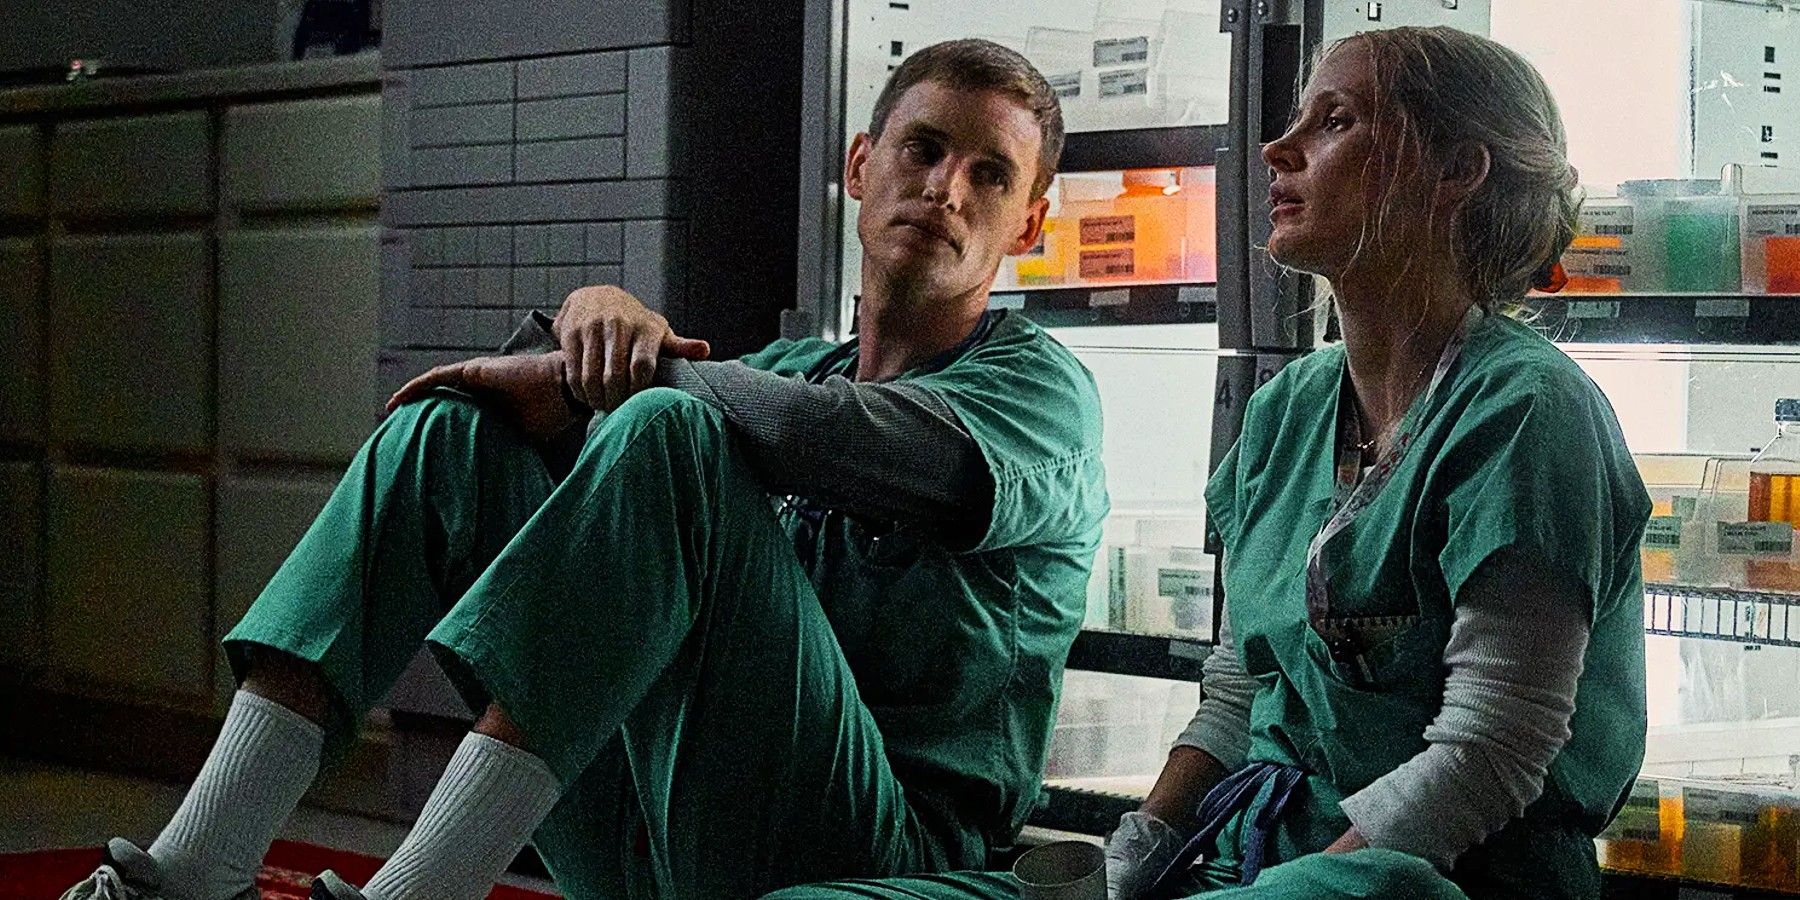 Eddie Redmayne as Charles Cullen and Jessica Chastain as Amy Loughren in The Good Nurse